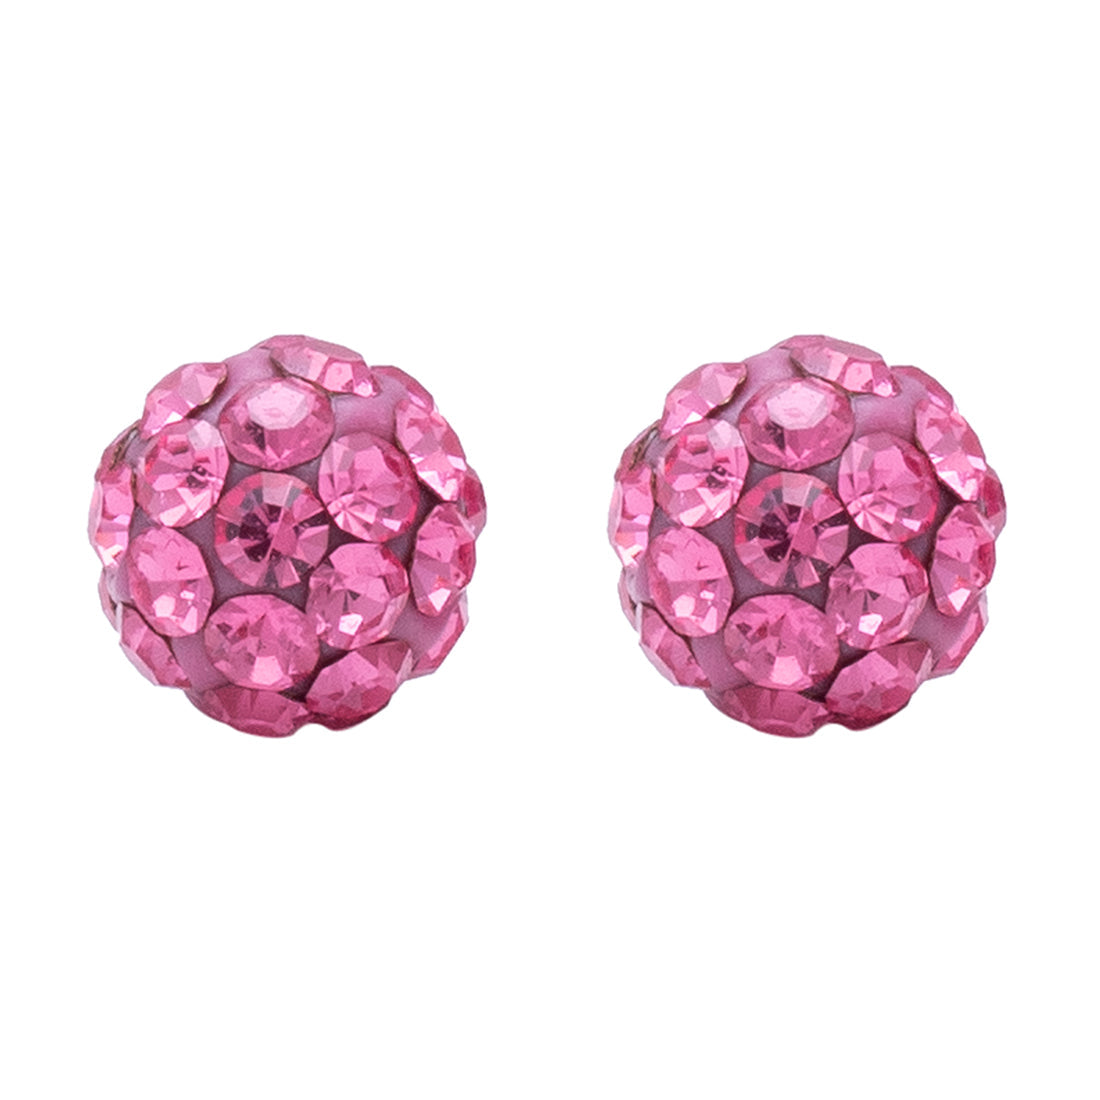 4.5MM Fireball Rose Allergy Free Stainless Steel Ear Studs | Ideal for everyday wear